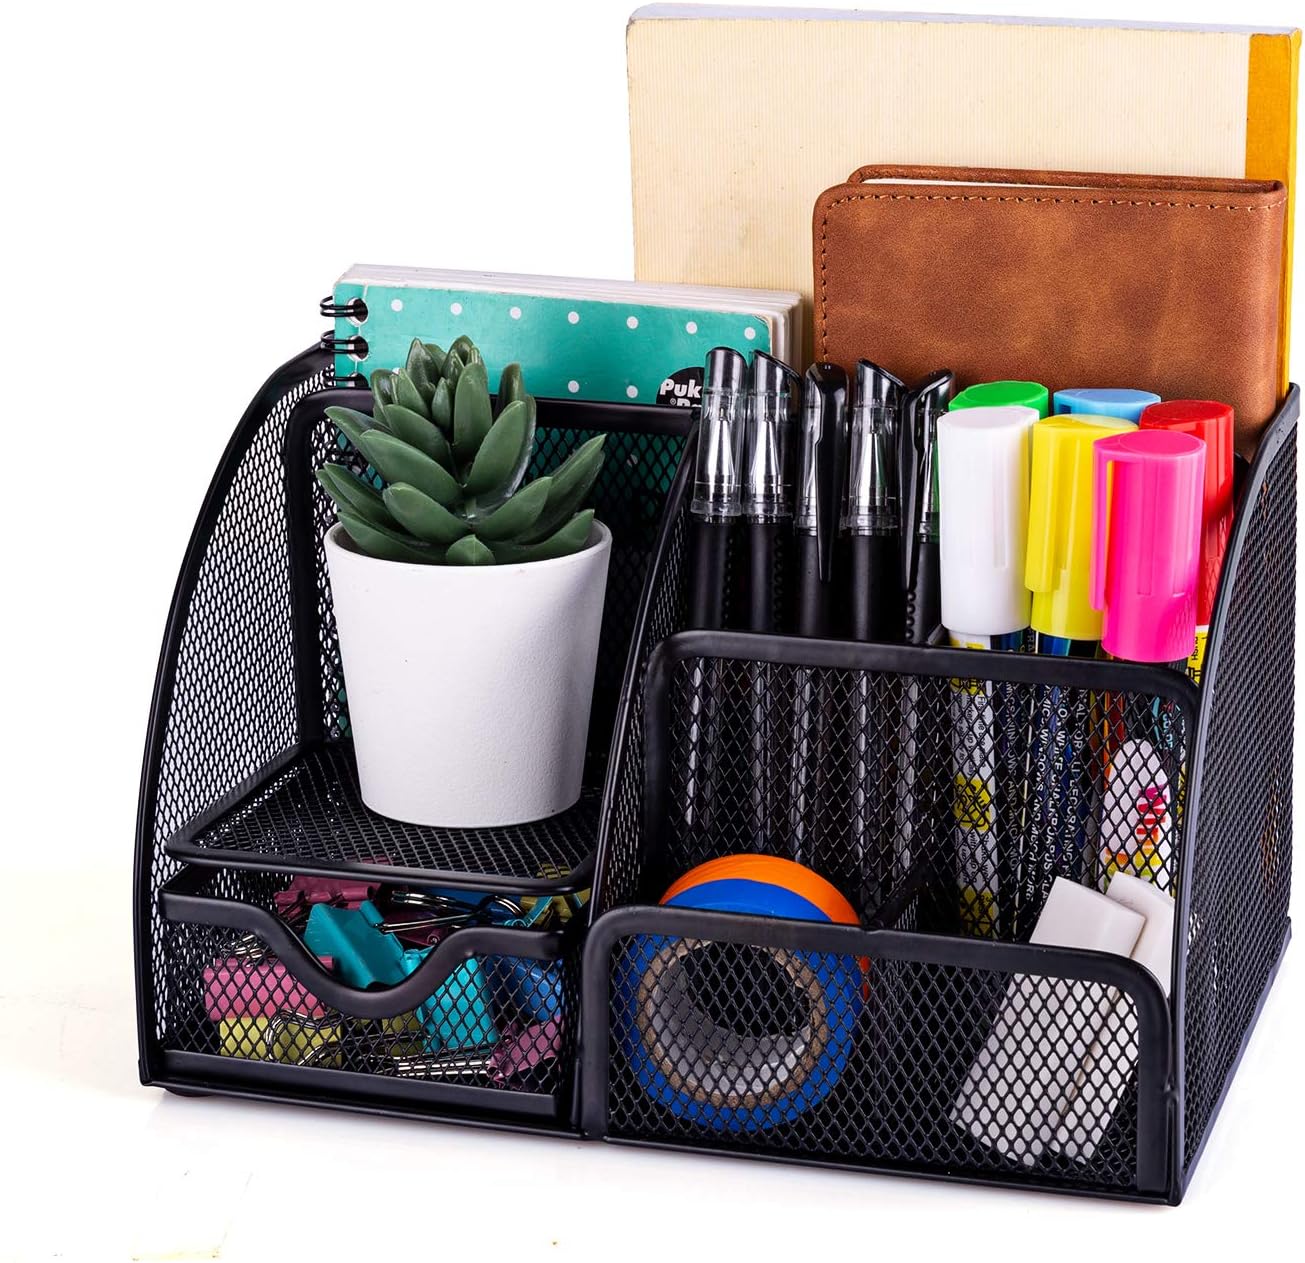 MDHAND Office Desk Organizer and Accessories Desk Drawer Organizer with 6 Compartments, Mesh Pencil Desk Organizer For Home Office